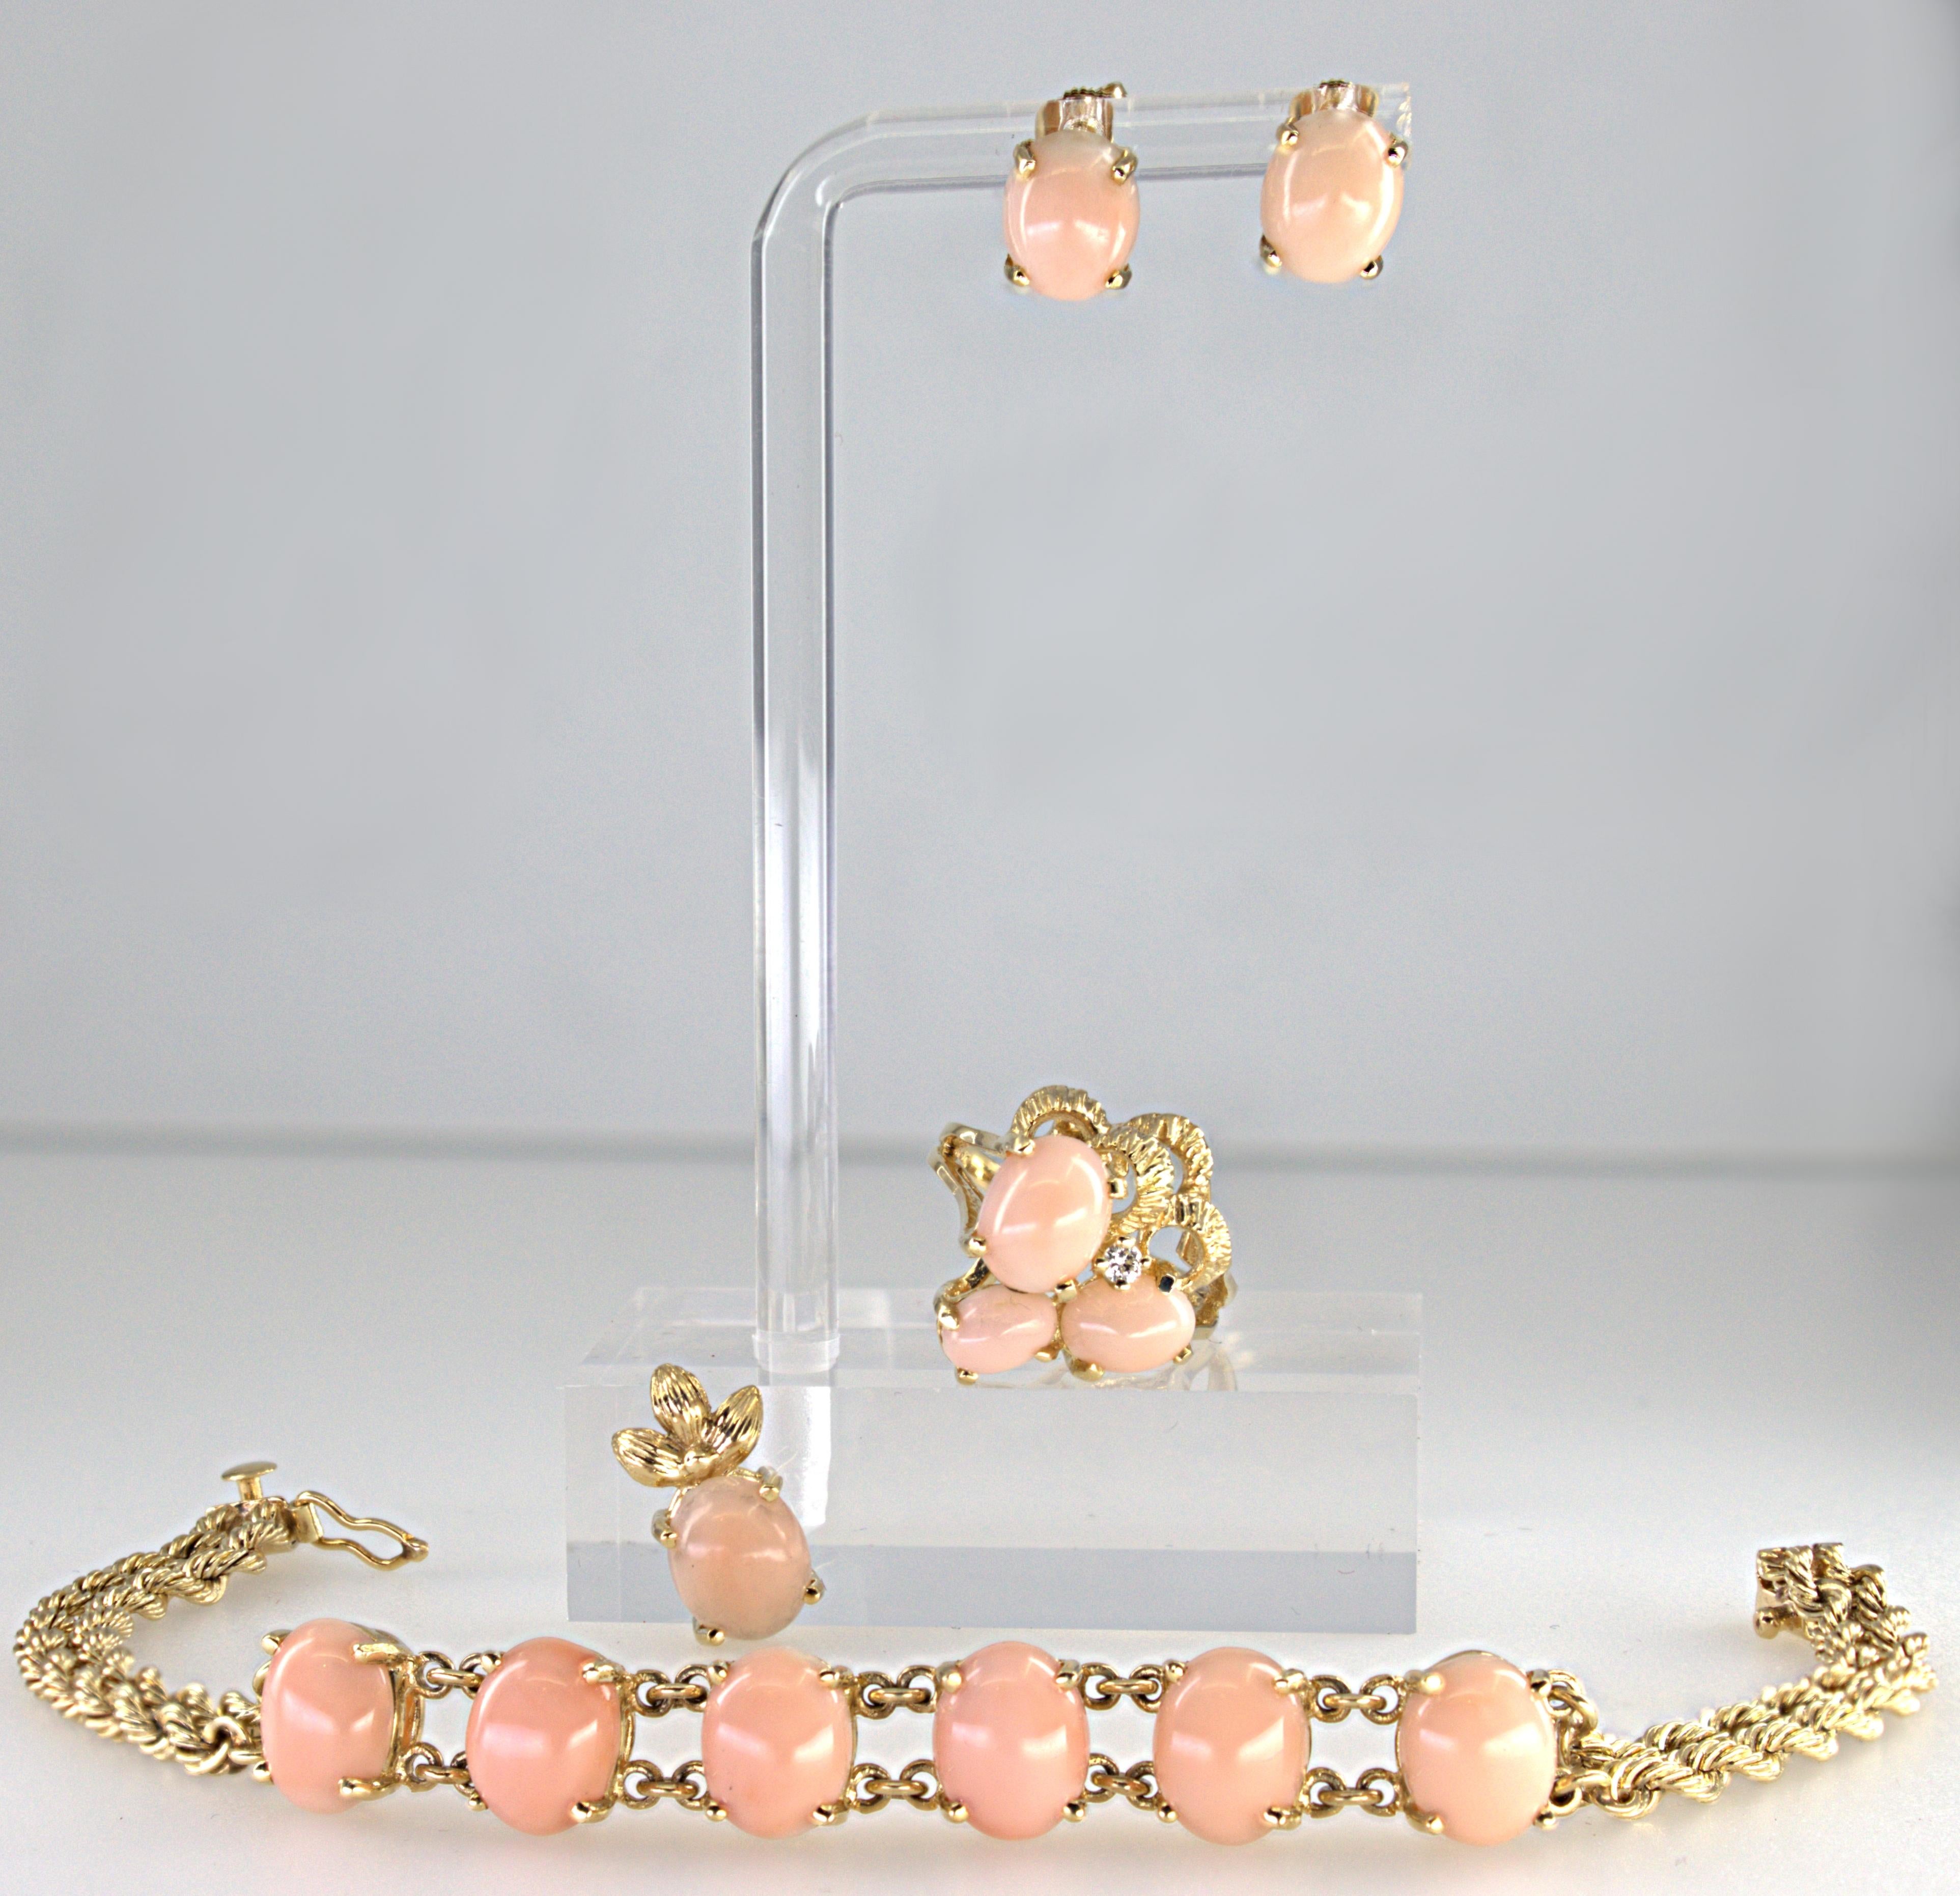 Including one bracelet; featuring (6) oval light pink angel skin coral cabochons, 10 X 7.9 X 4 mm, set and linked in 14k yellow gold, attached to a double 14k yellow gold rope link chain, completed by a box clasp with figure eight safety, forming 7